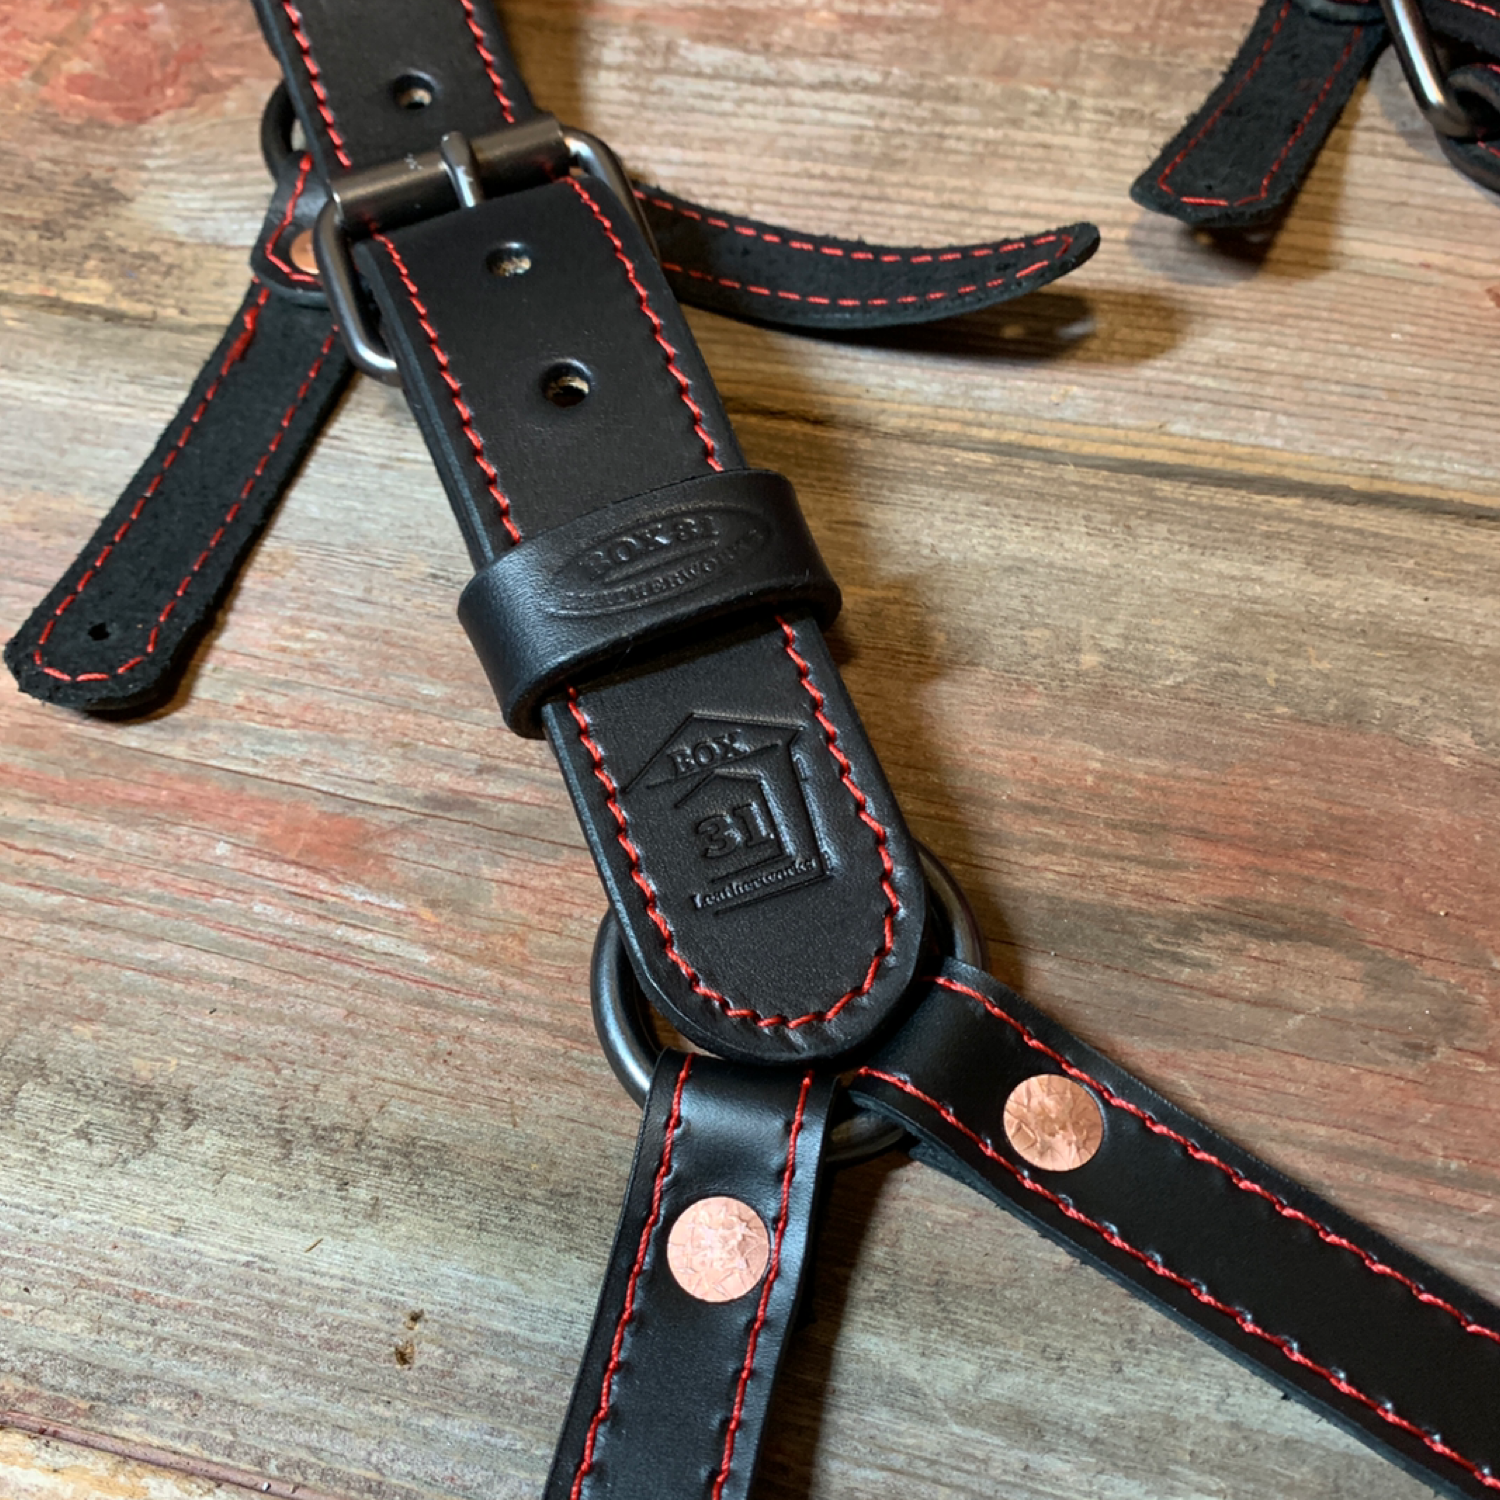 Leather H-Back Suspenders